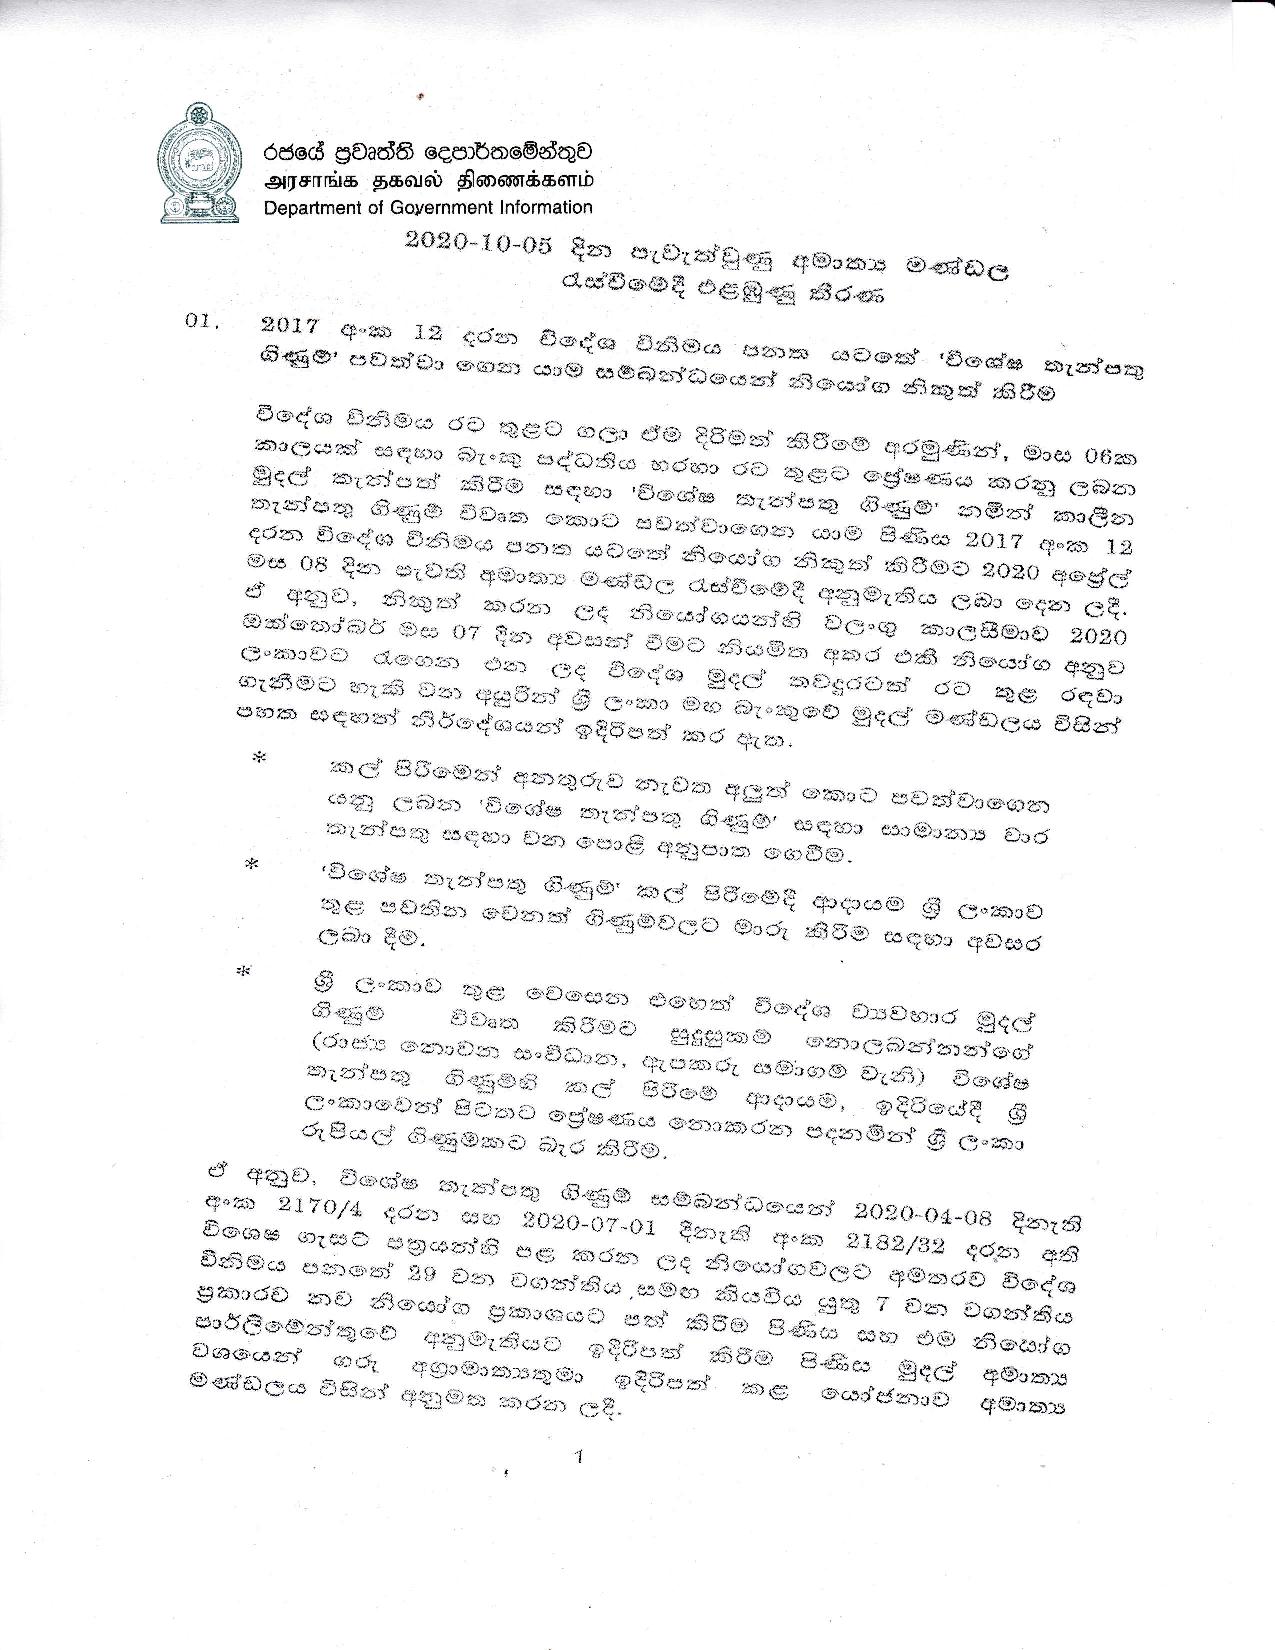 Cabinet Decision on 05.10.2020 page 001